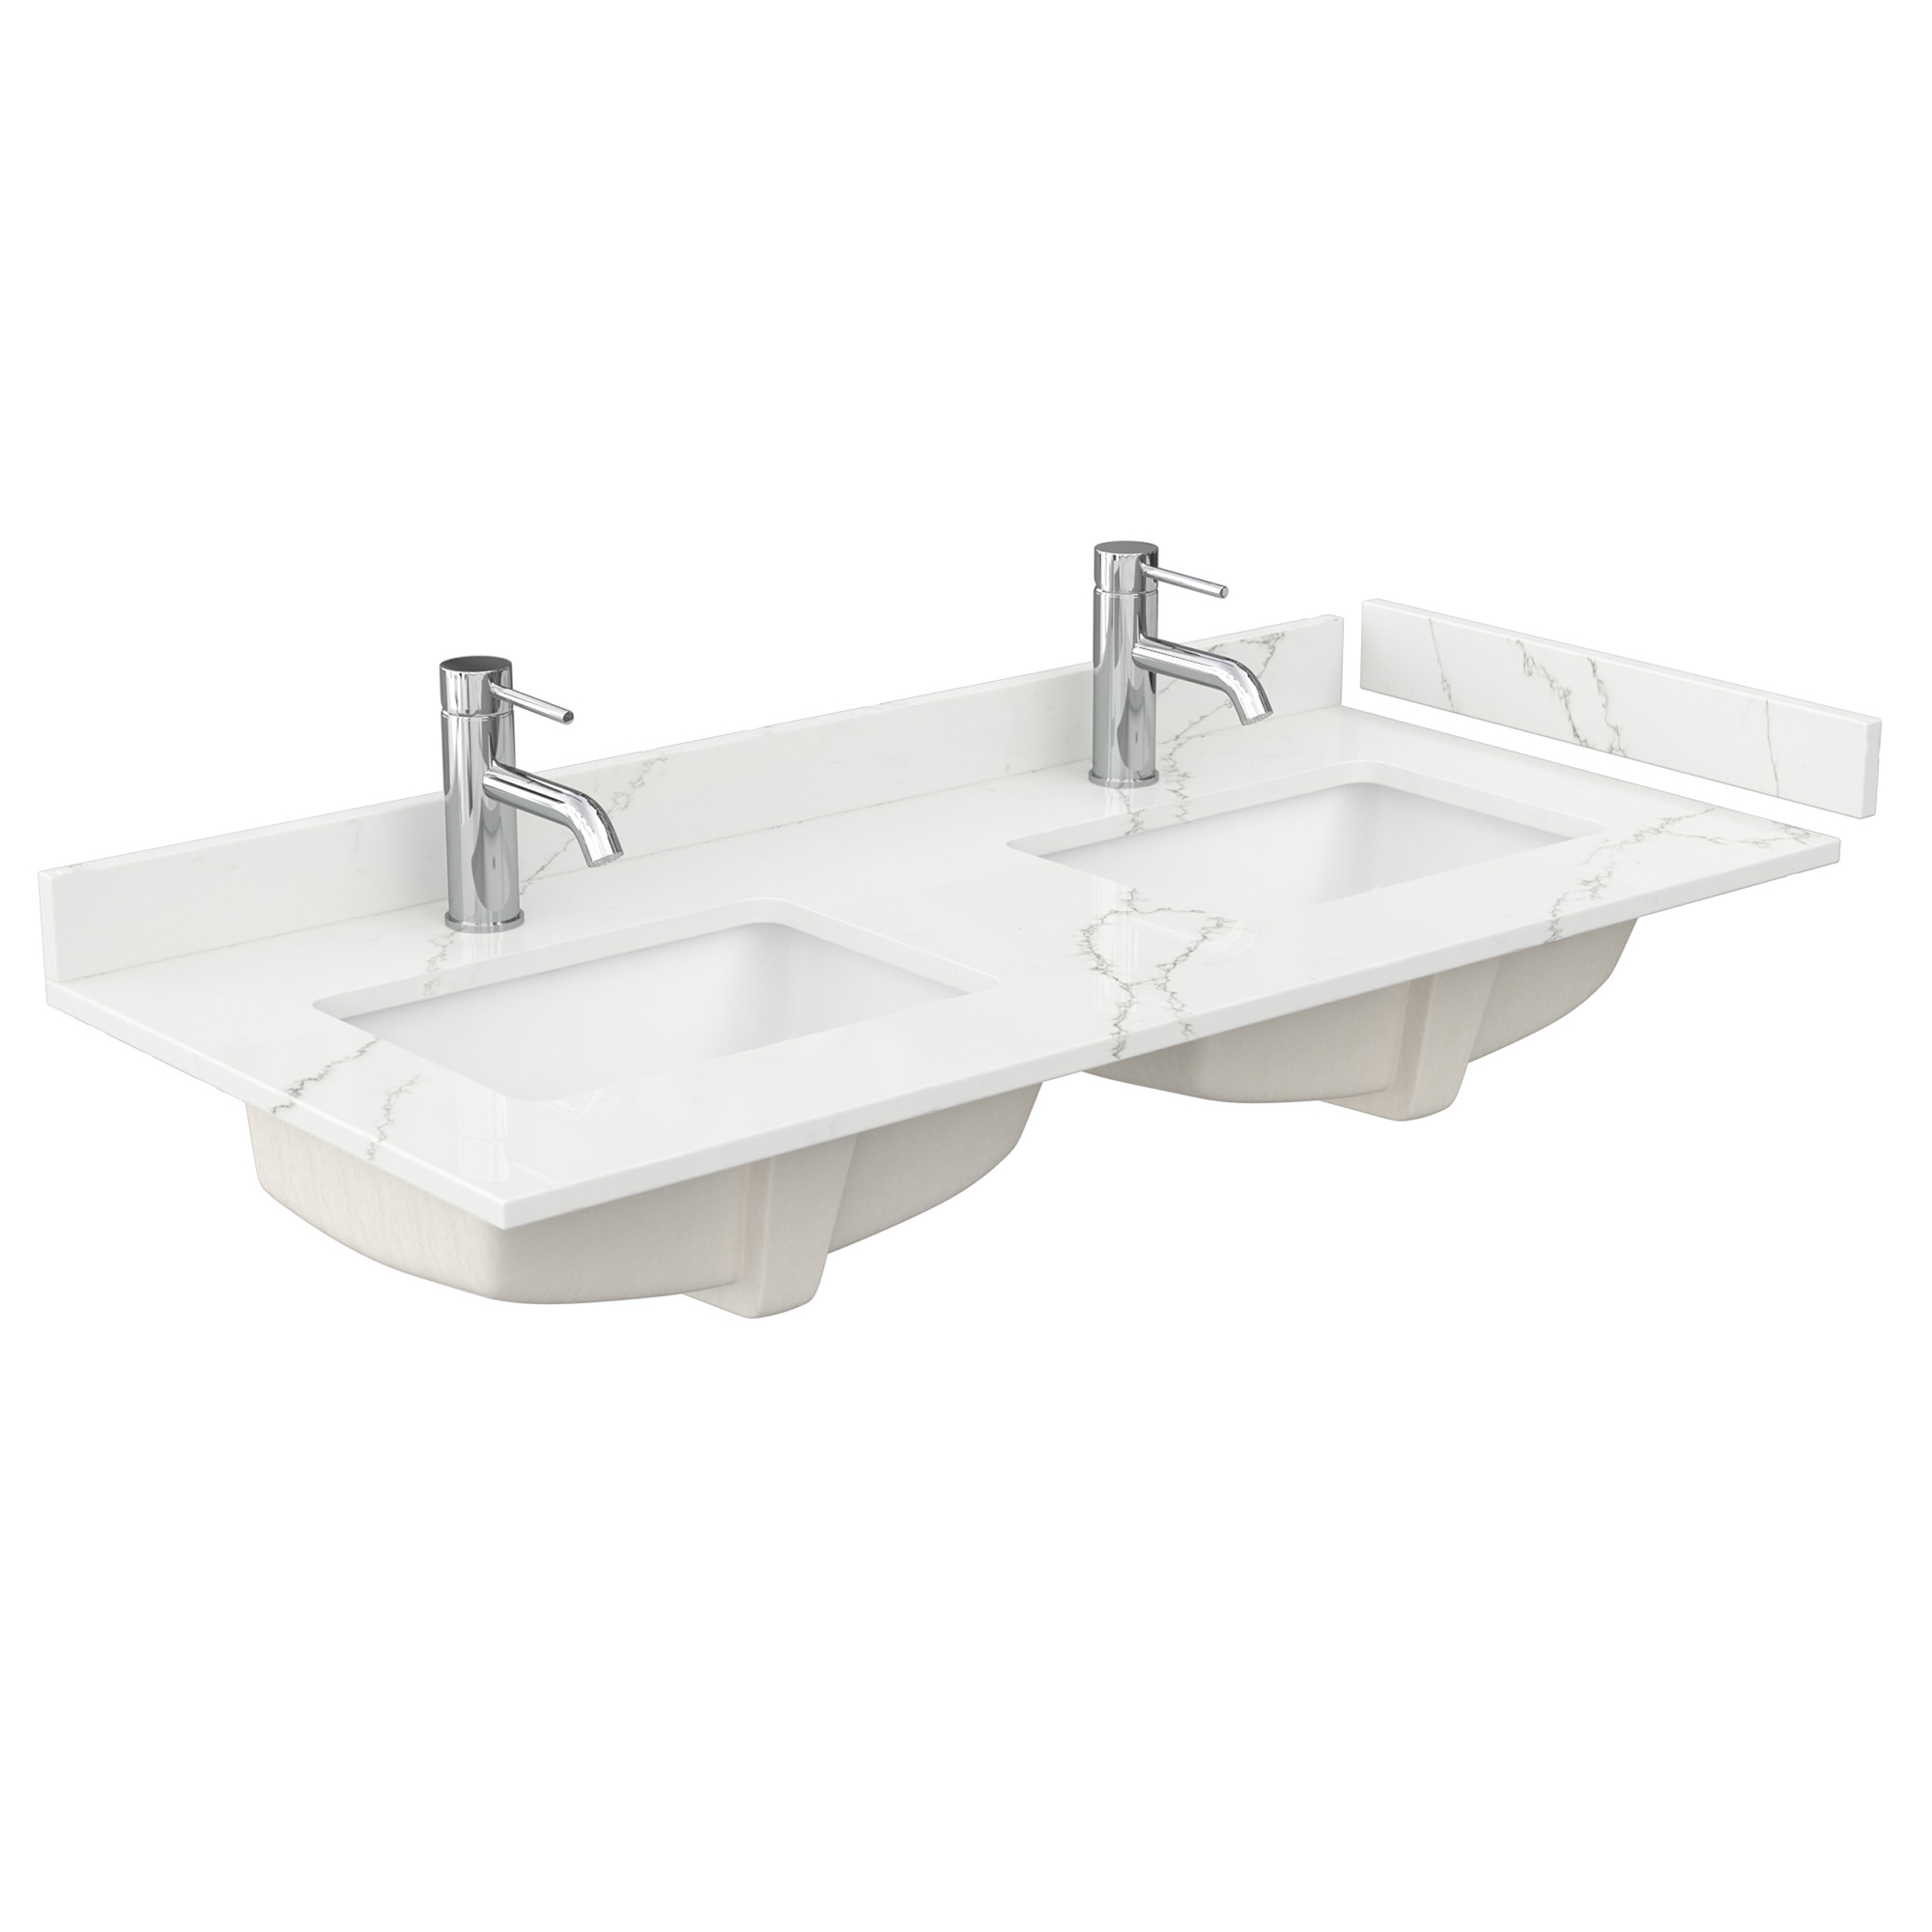 48" Double Countertop - Giotto Quartz (8066) with Undermount Square Sink (1-Hole) - Includes Backsplash and Sidesplash WCFQC148DTOPUNSGT